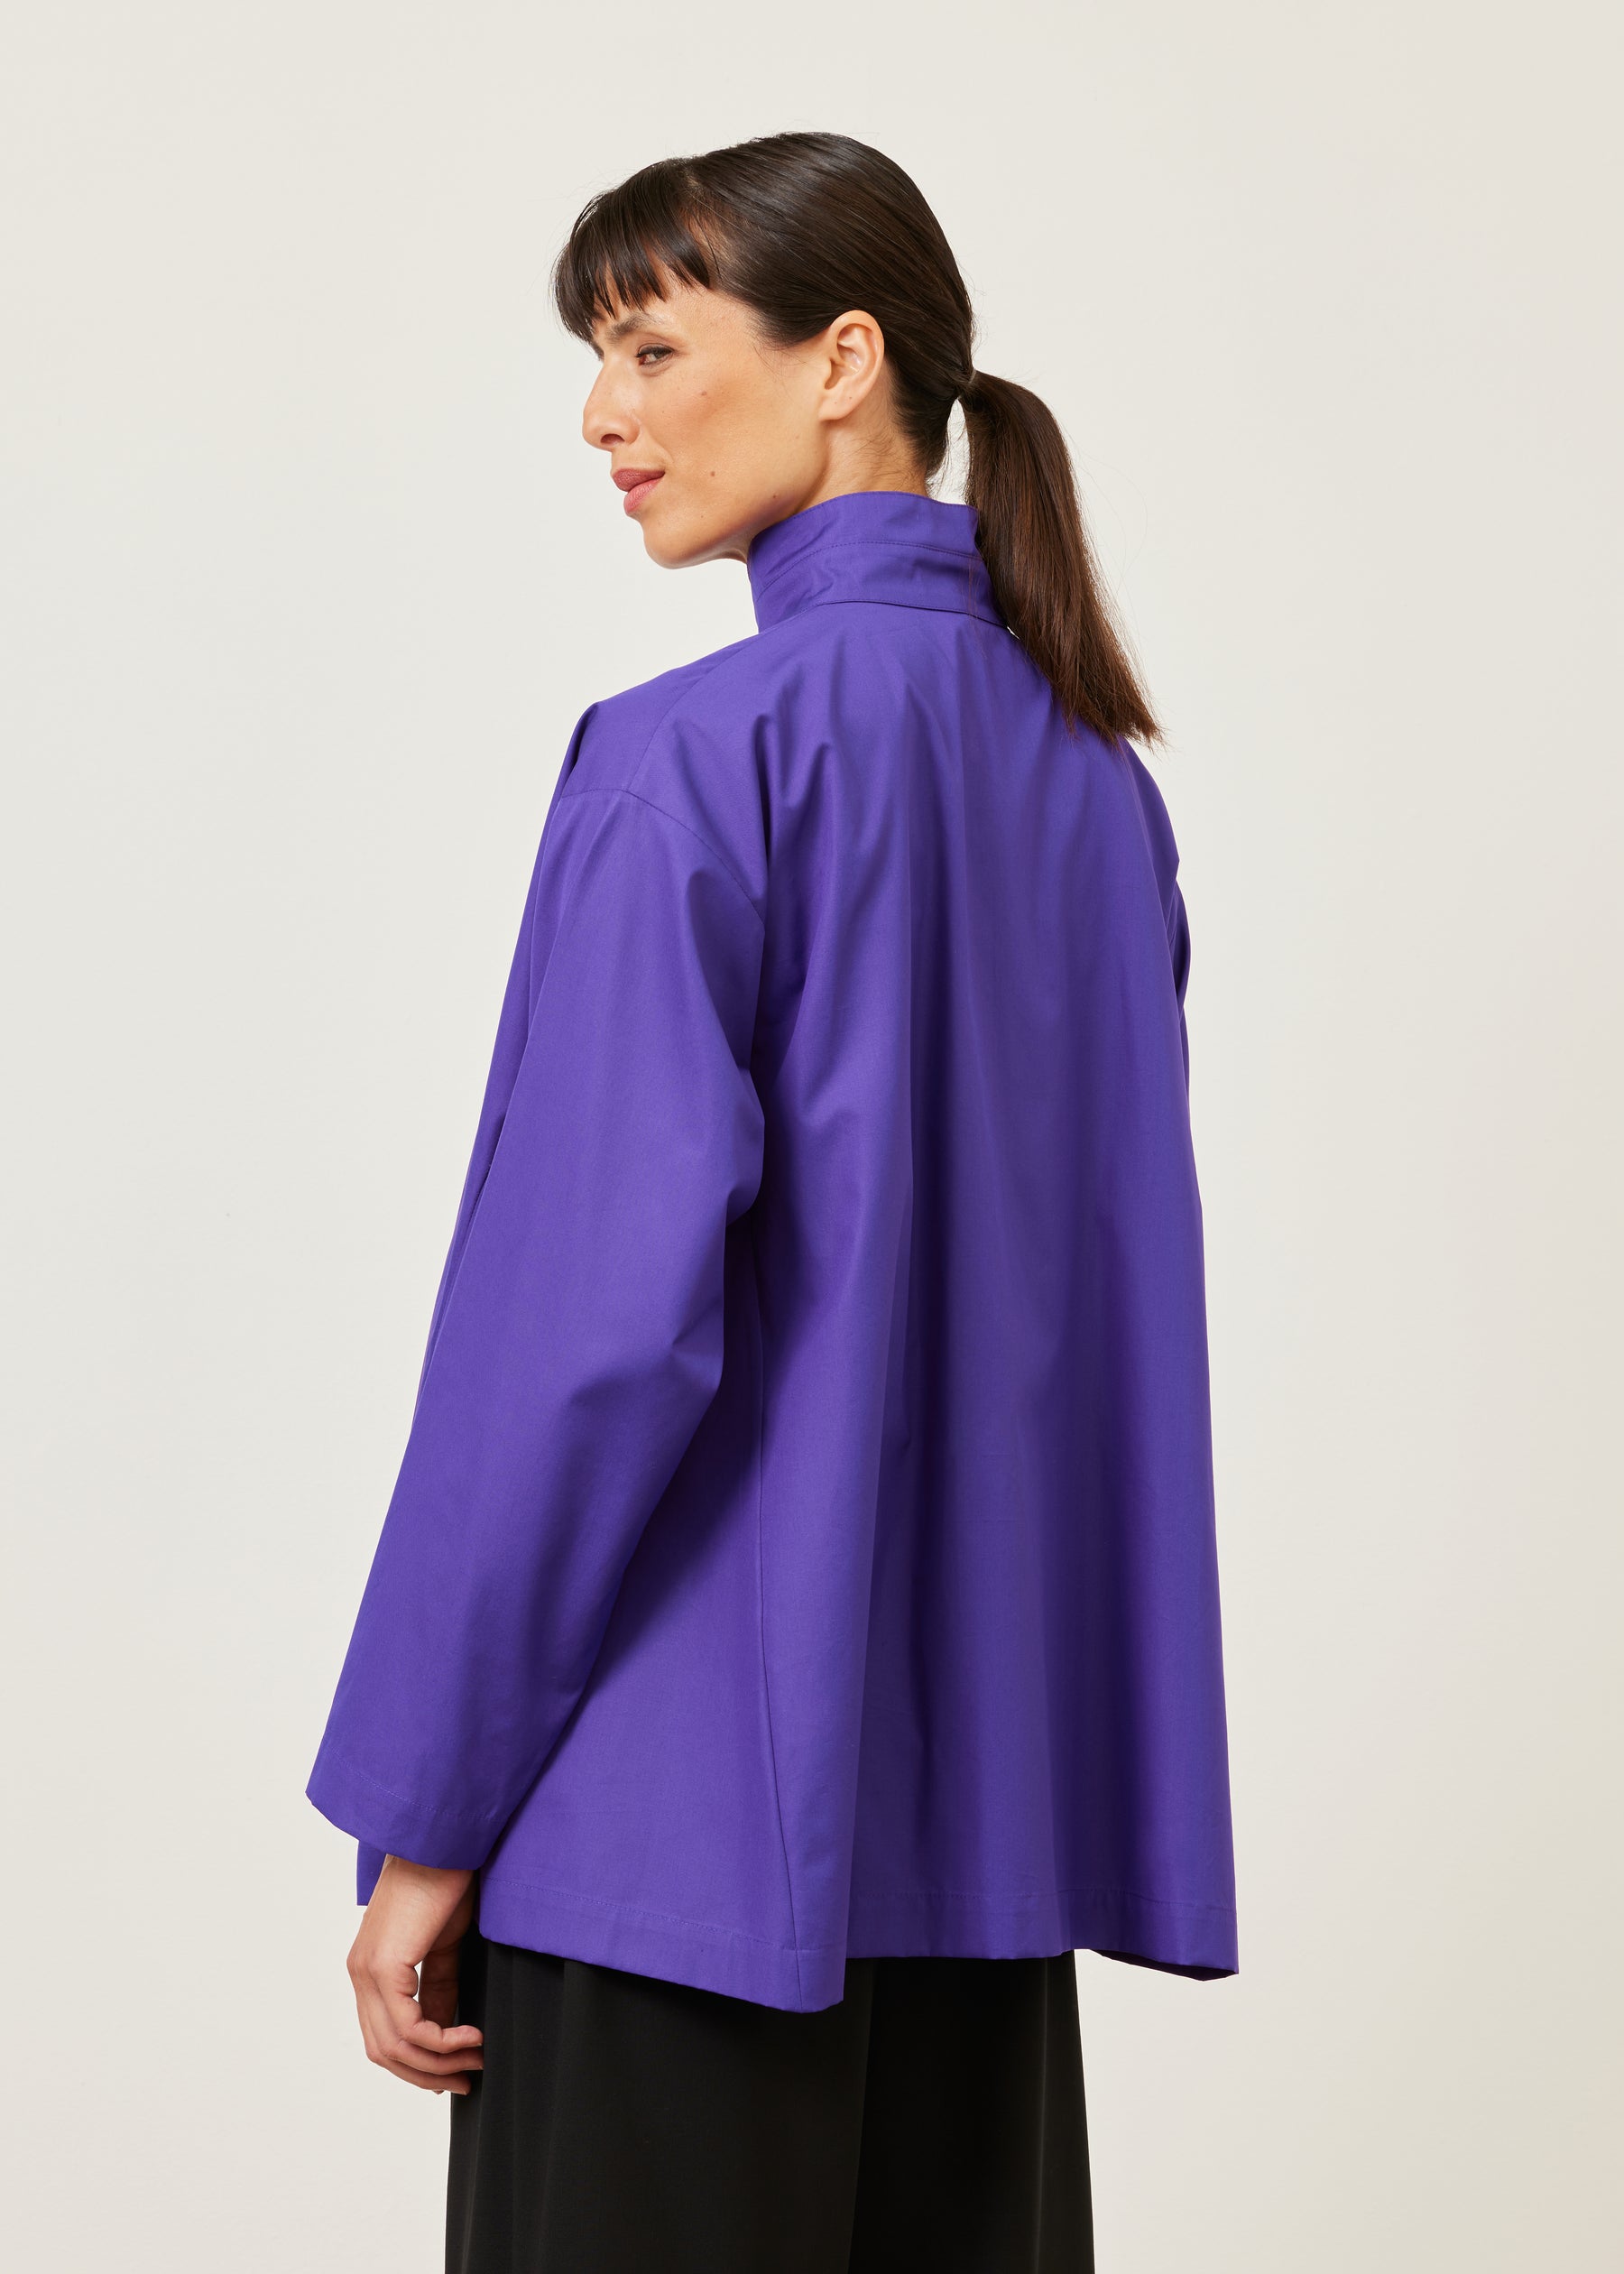 side panelled shirt with double stand collar - long